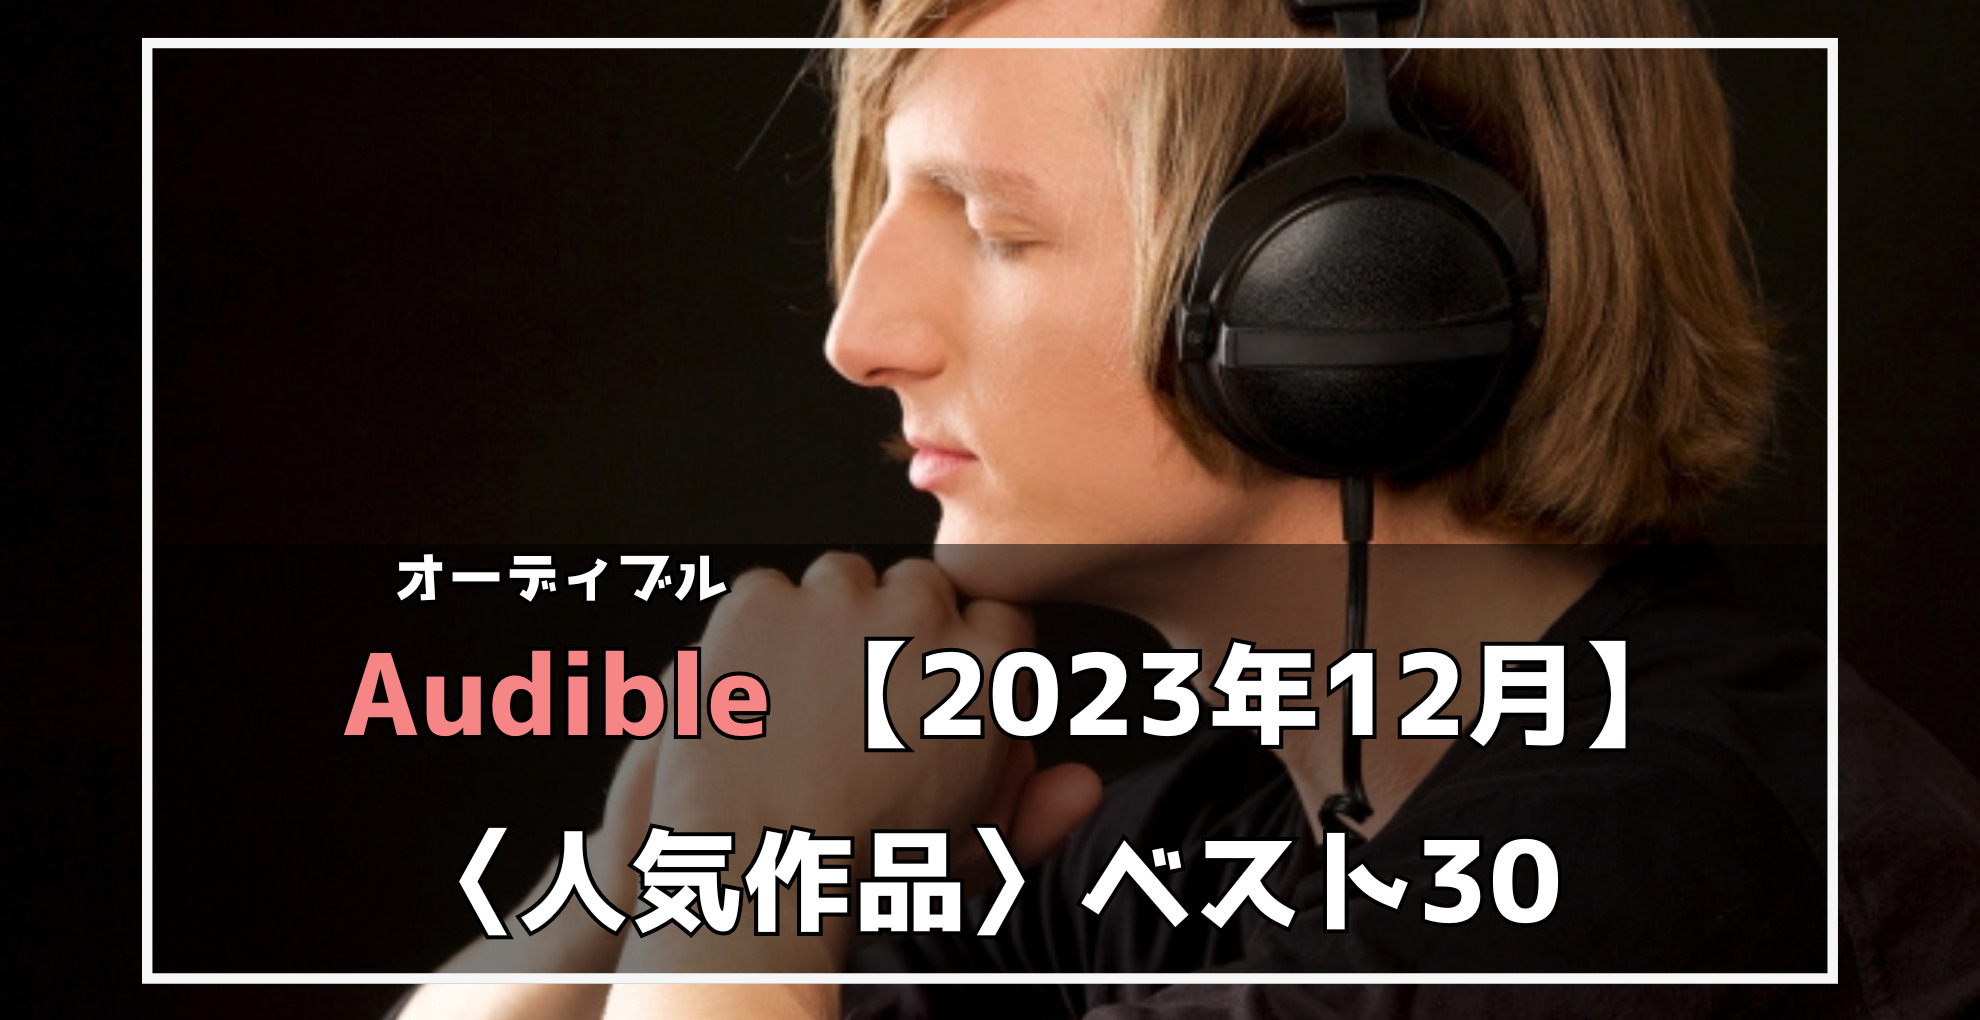 【Audible】2023年12月人気作品ベスト30